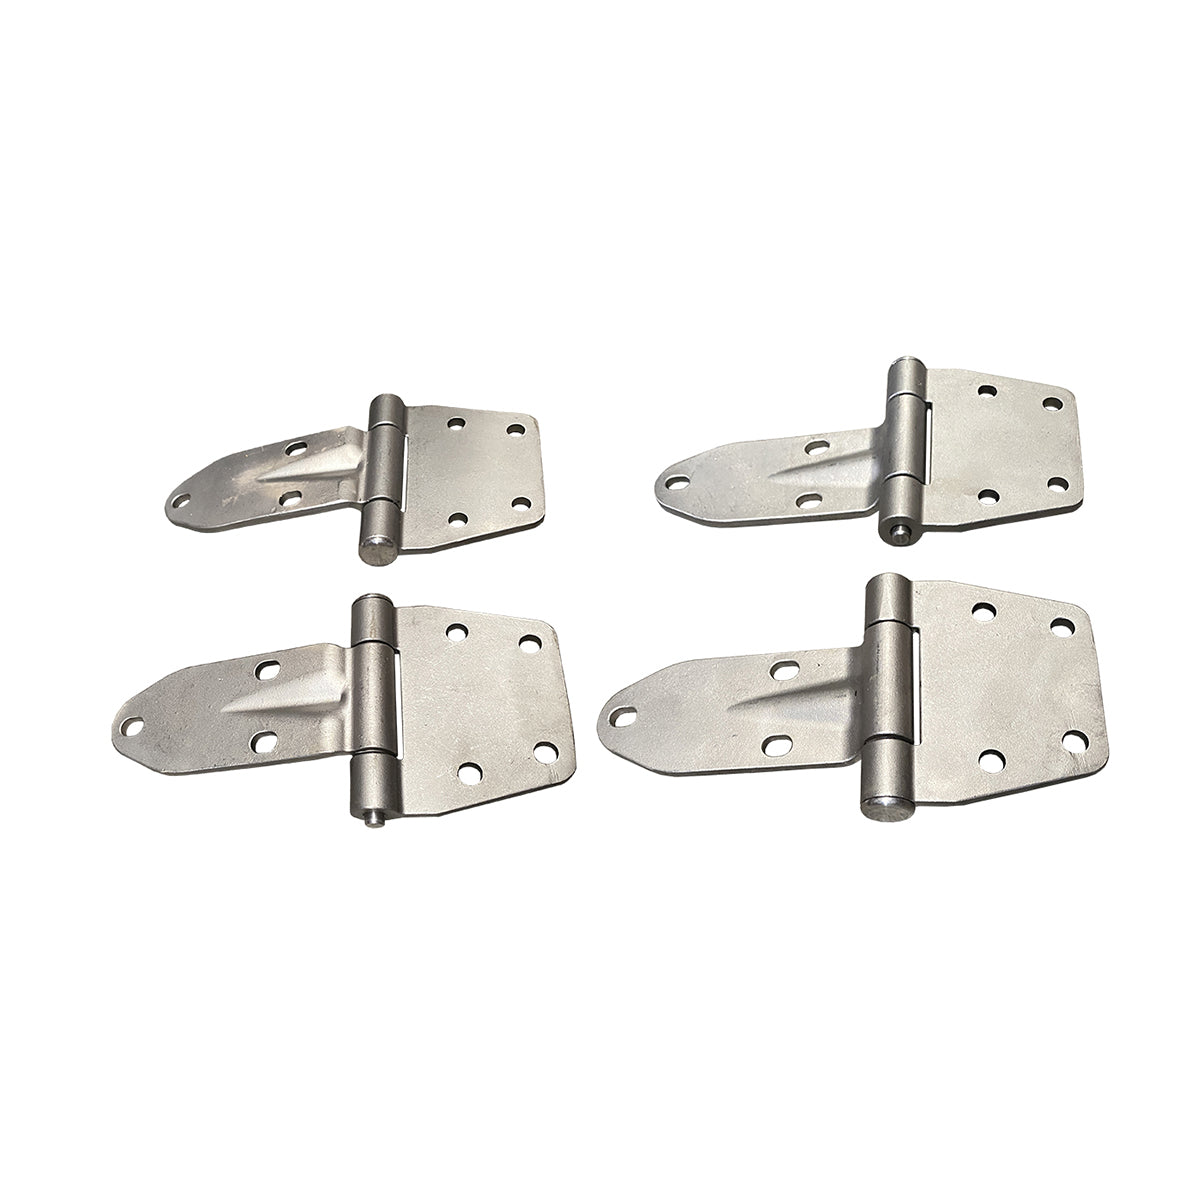 Front door hinges. Upper and Lower hinges for one door. Stainless Steel, for FJ40, FJ45 Toyota Land Cruiser